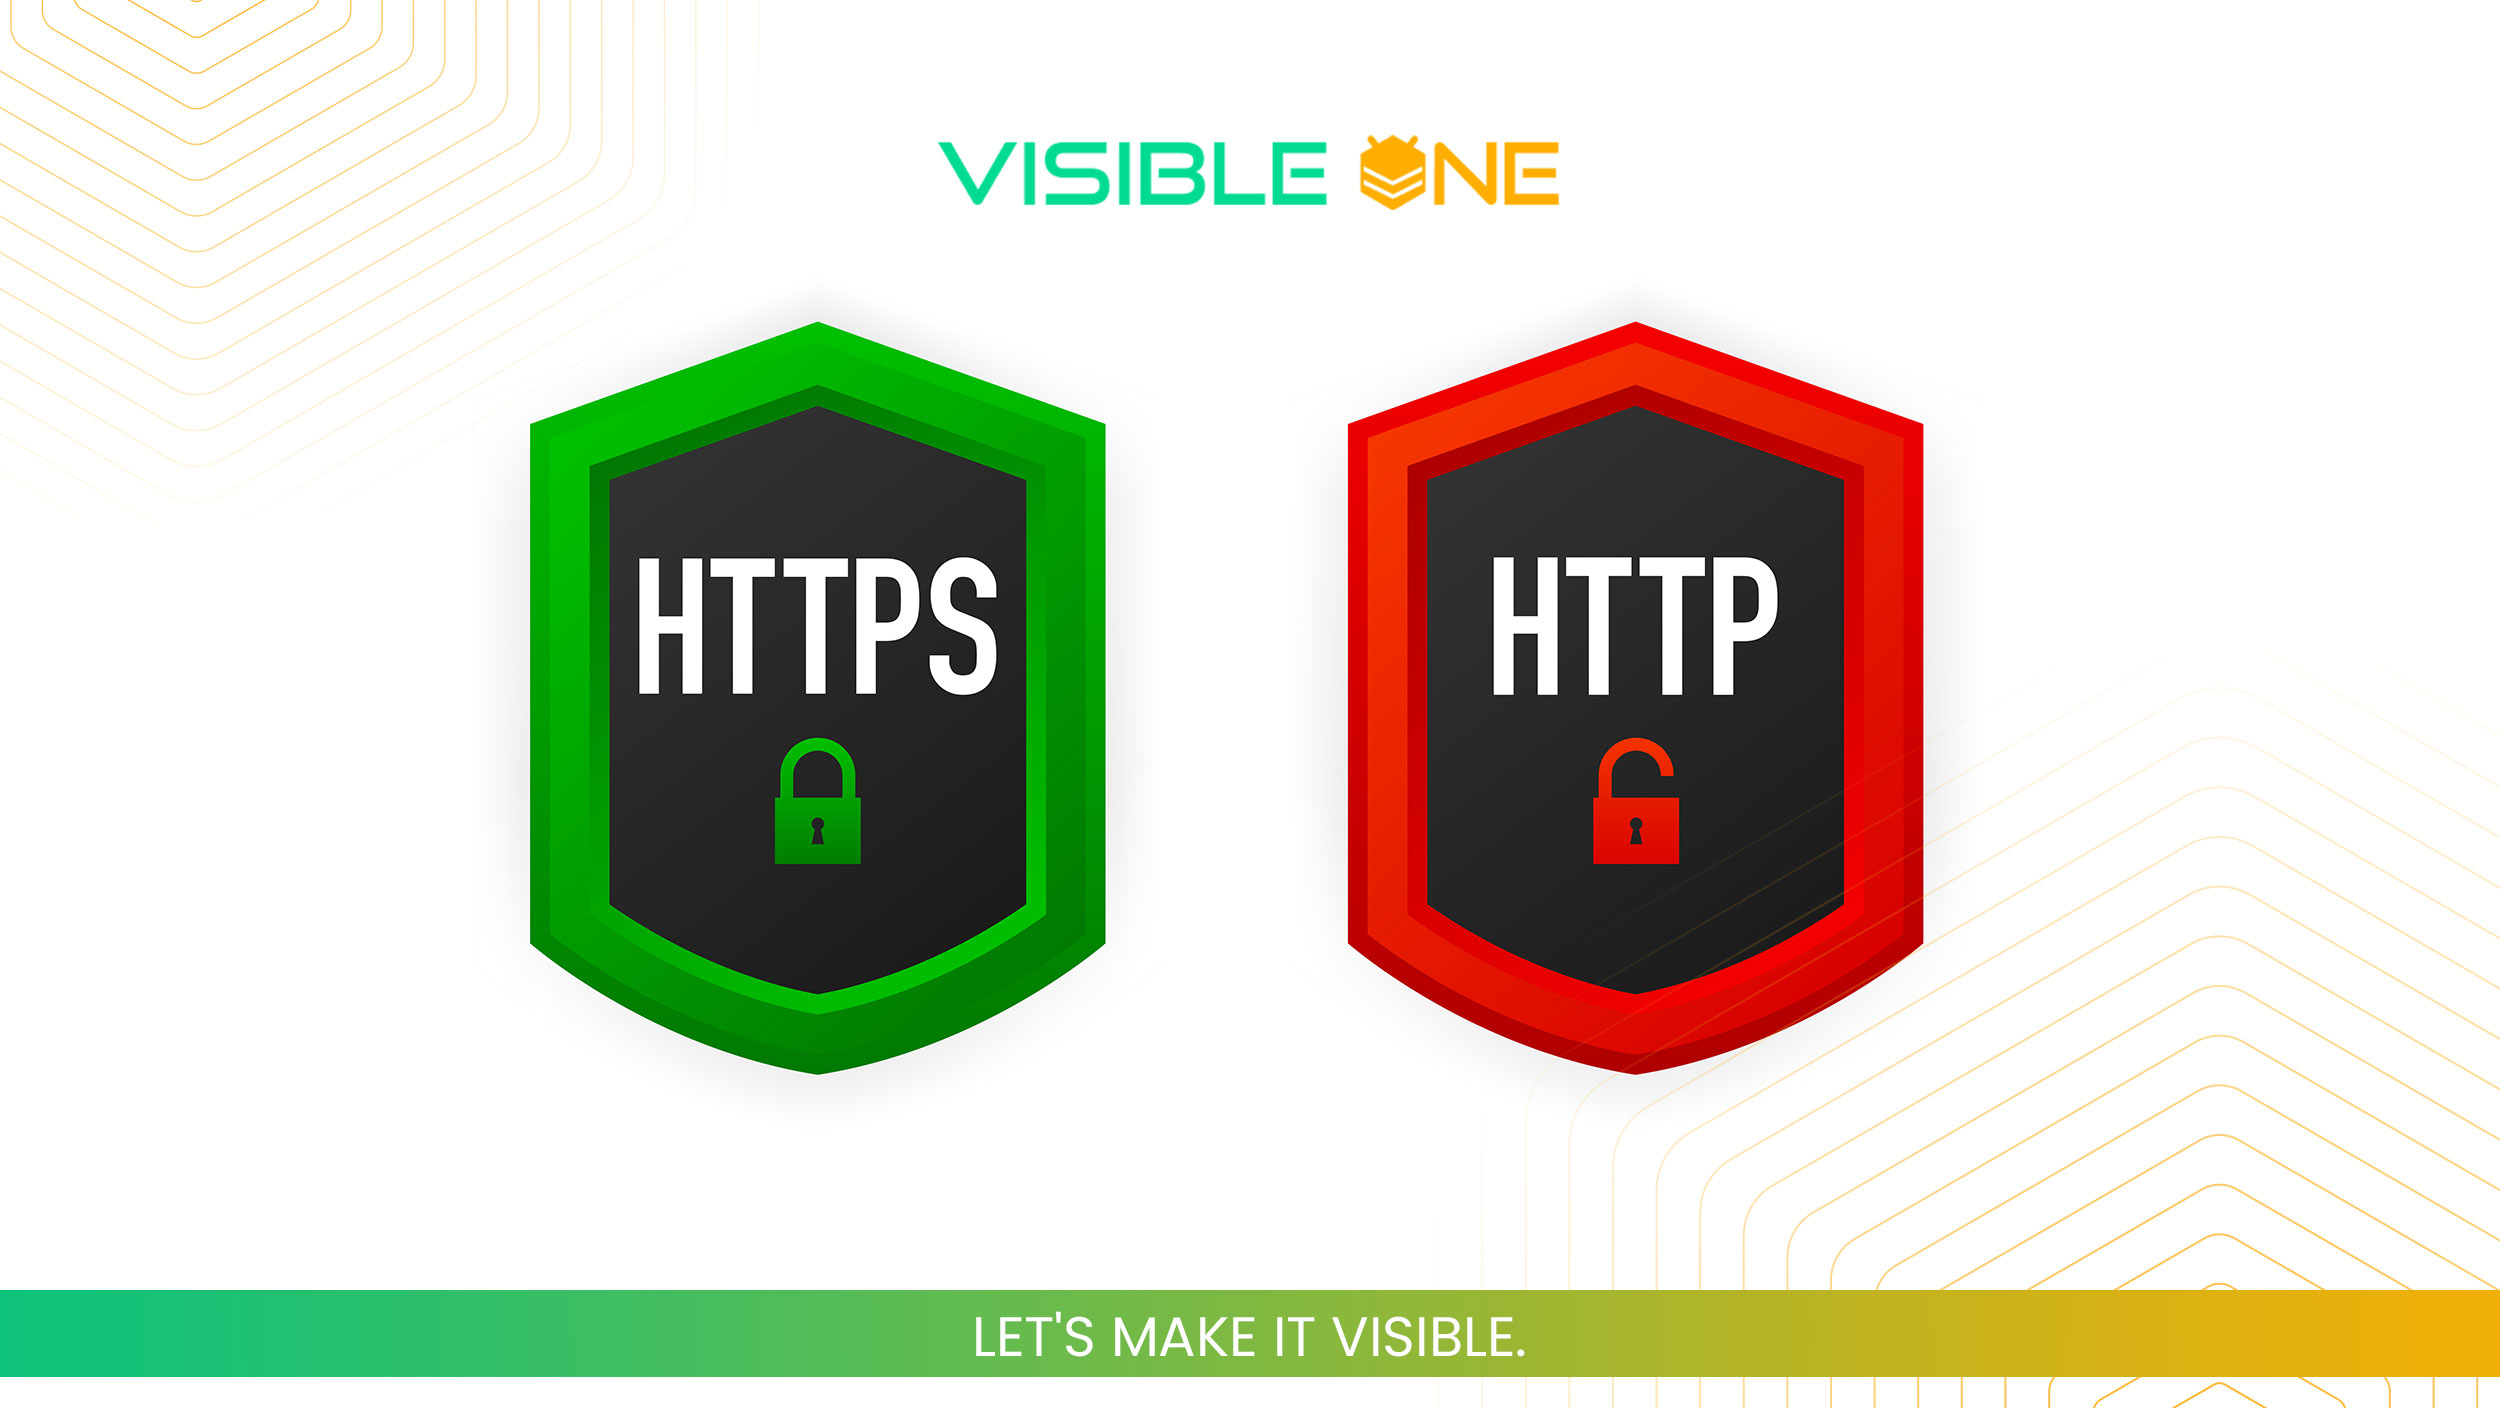 Google Chrome Will Mark HTTP Sites as “Not Secure” Effective July 2018